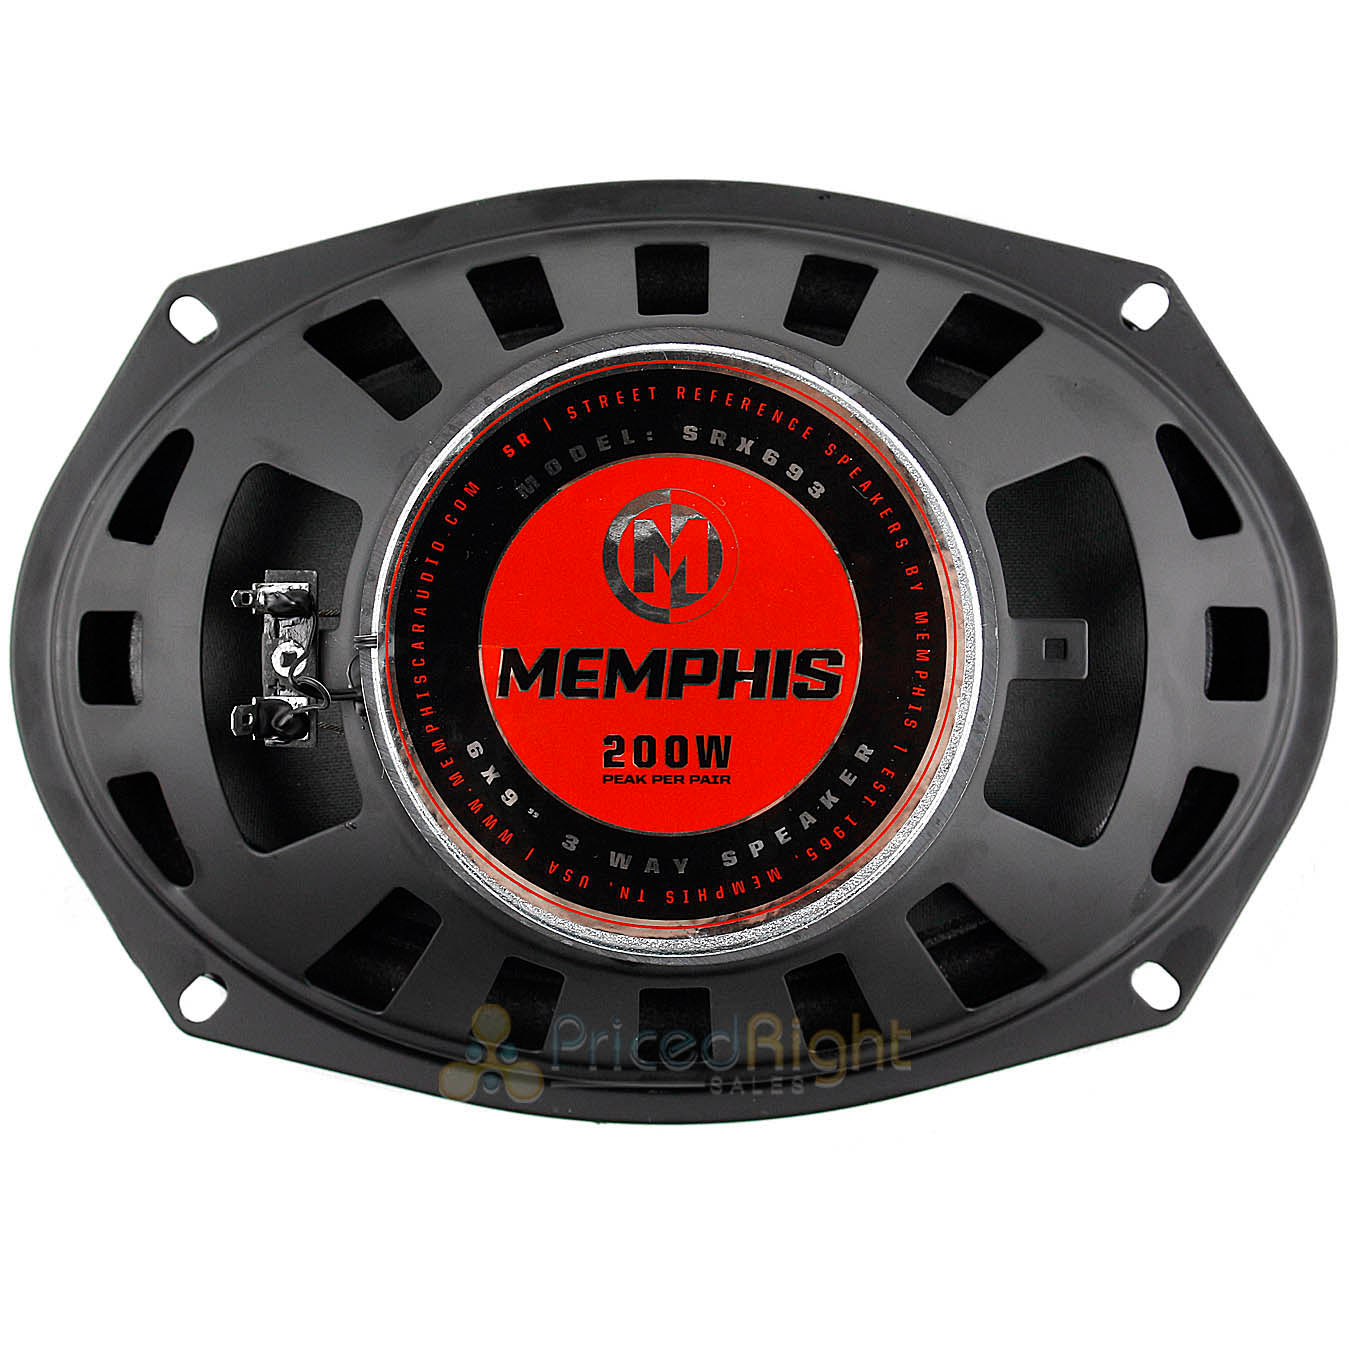 4 Pack Memphis 6x9" 3 Way Coaxial Speakers 100W Max Street Reference Series